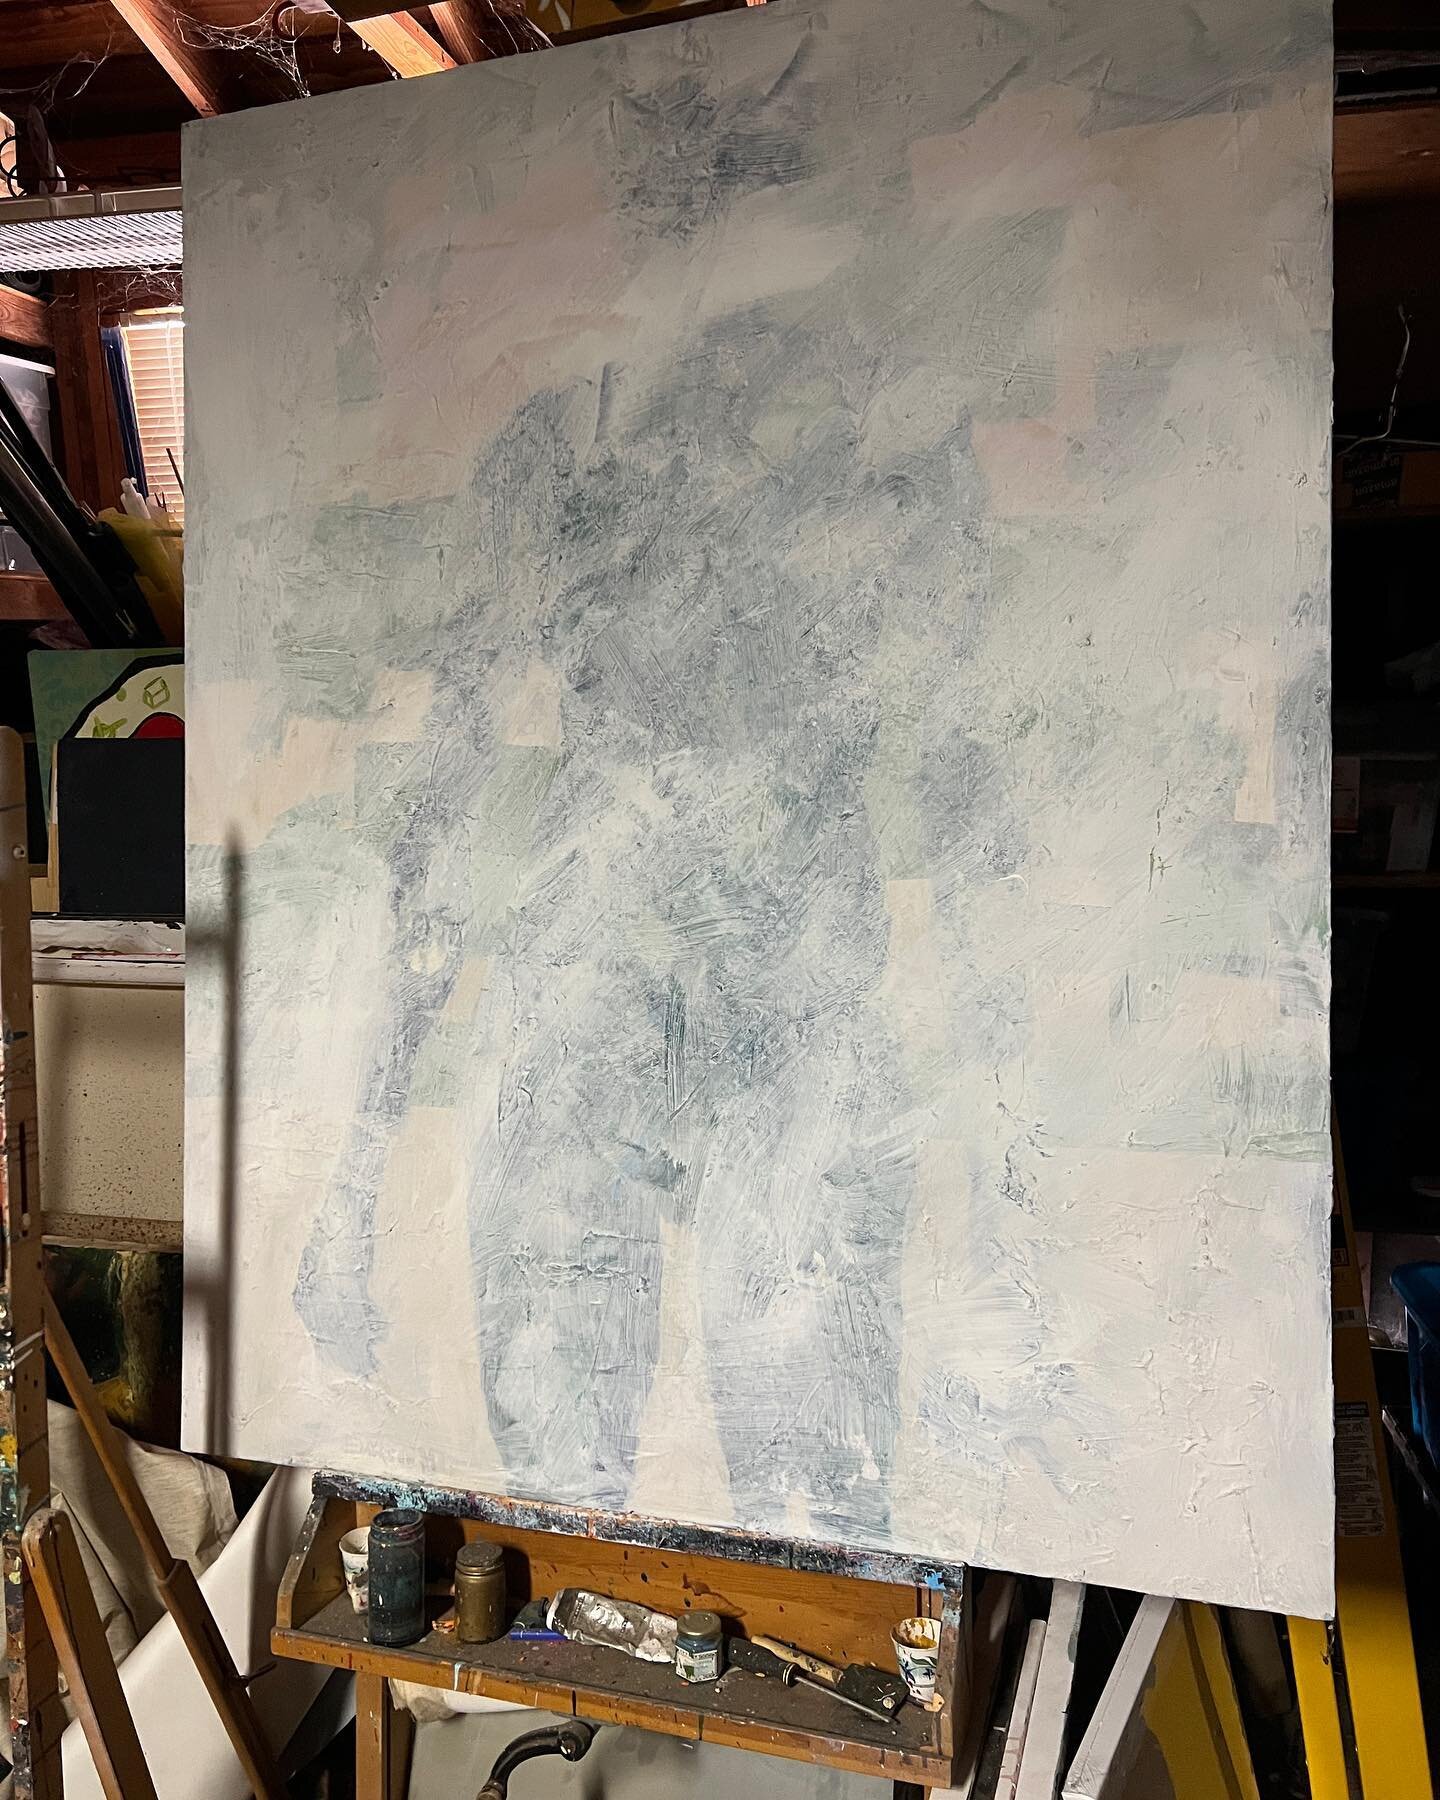 That &ldquo;interesting&rdquo; feeling when you gesso over a painting on a $500 canvas only to remember in the middle of the night that the background was all done in oil paint. 
Not happy is putting it mildly.